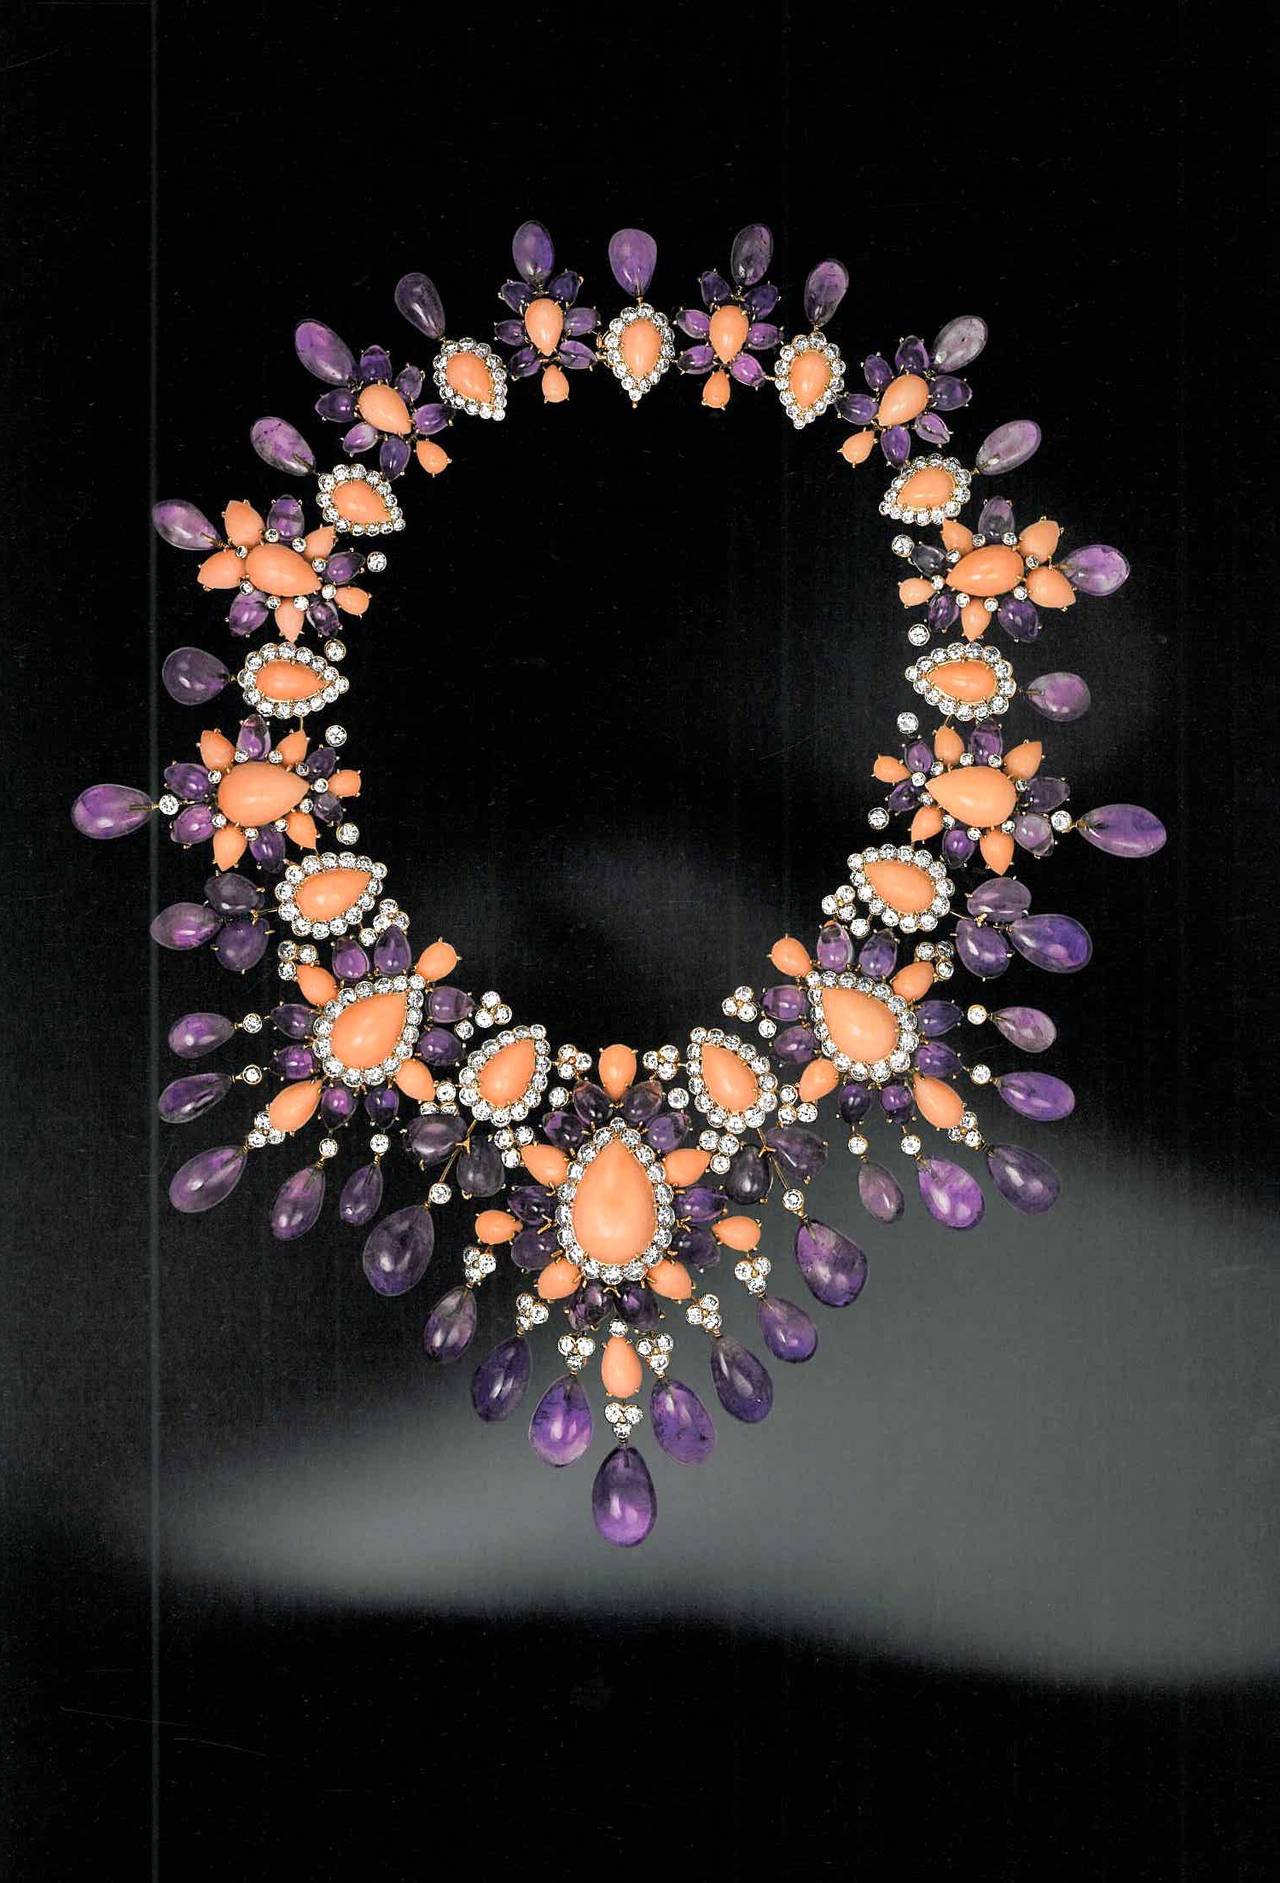  The Spirit of Beauty by Van Cleef & Arpels (Book) For Sale 3